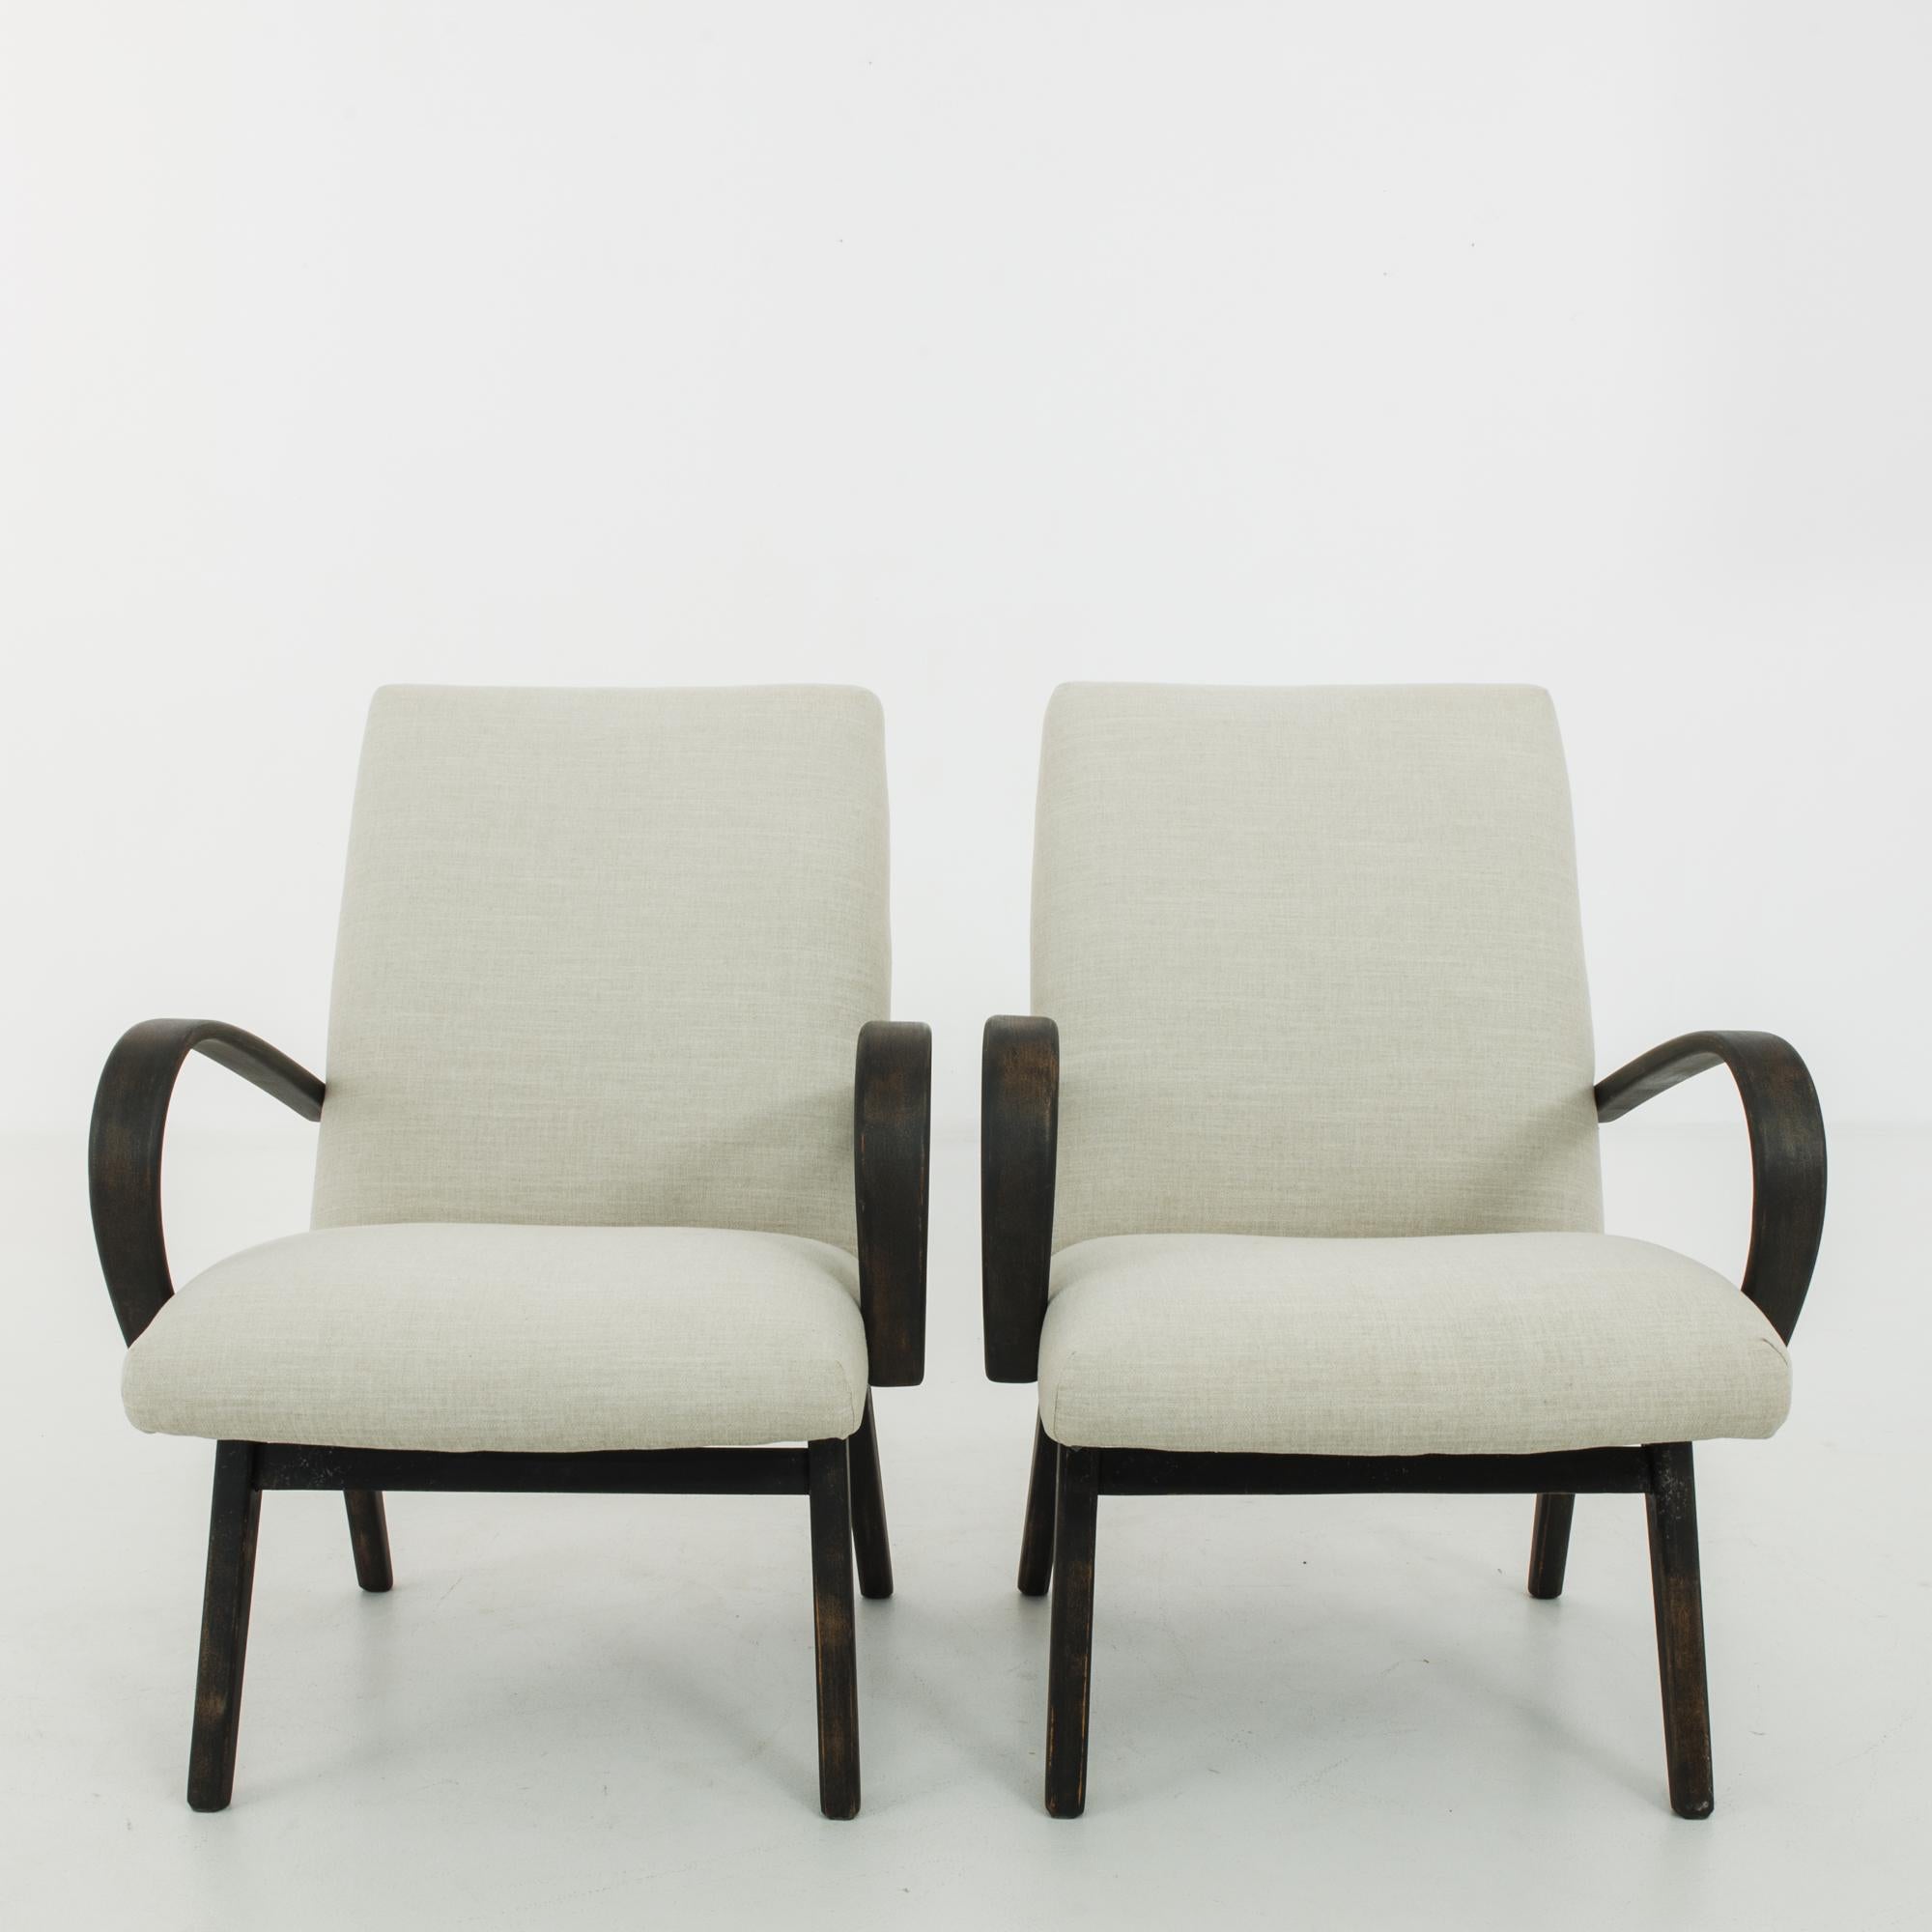 This pair of upholstered wooden armchairs was made in Czechoslovakia, circa 1960. Bentwood armrests and tapered, splayed legs give the chairs an expressive silhouette. The newly upholstered seats and backs come in a calming pale gray tone,